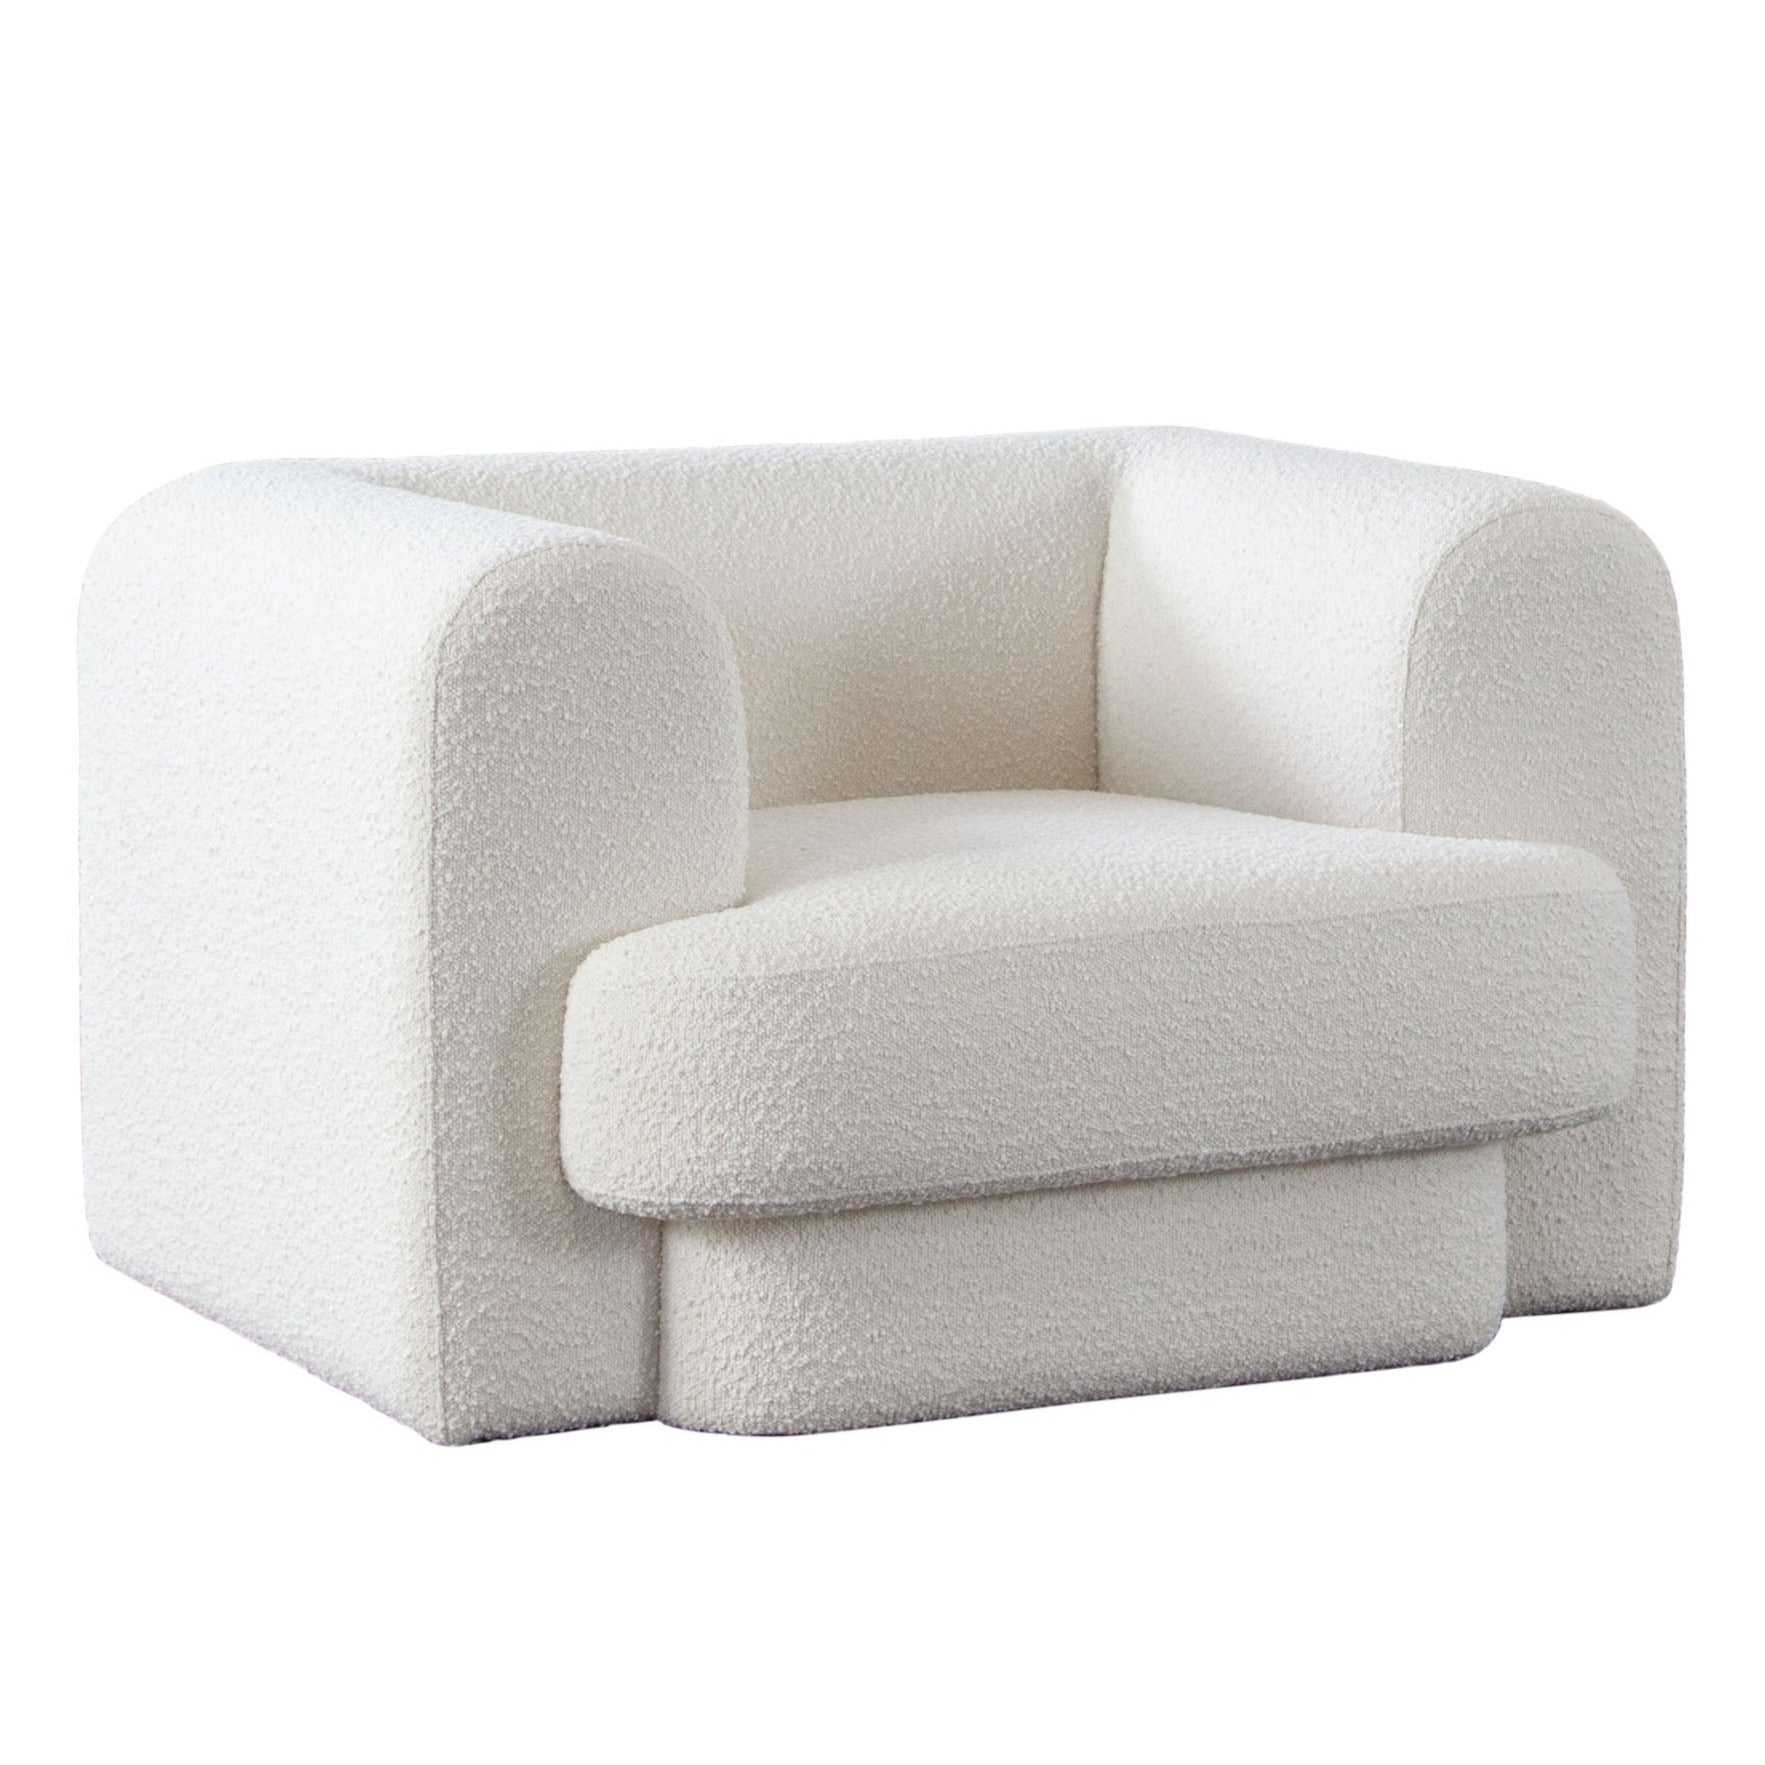 Form Chair in Ivory Boucle Fabric - Elite Maison